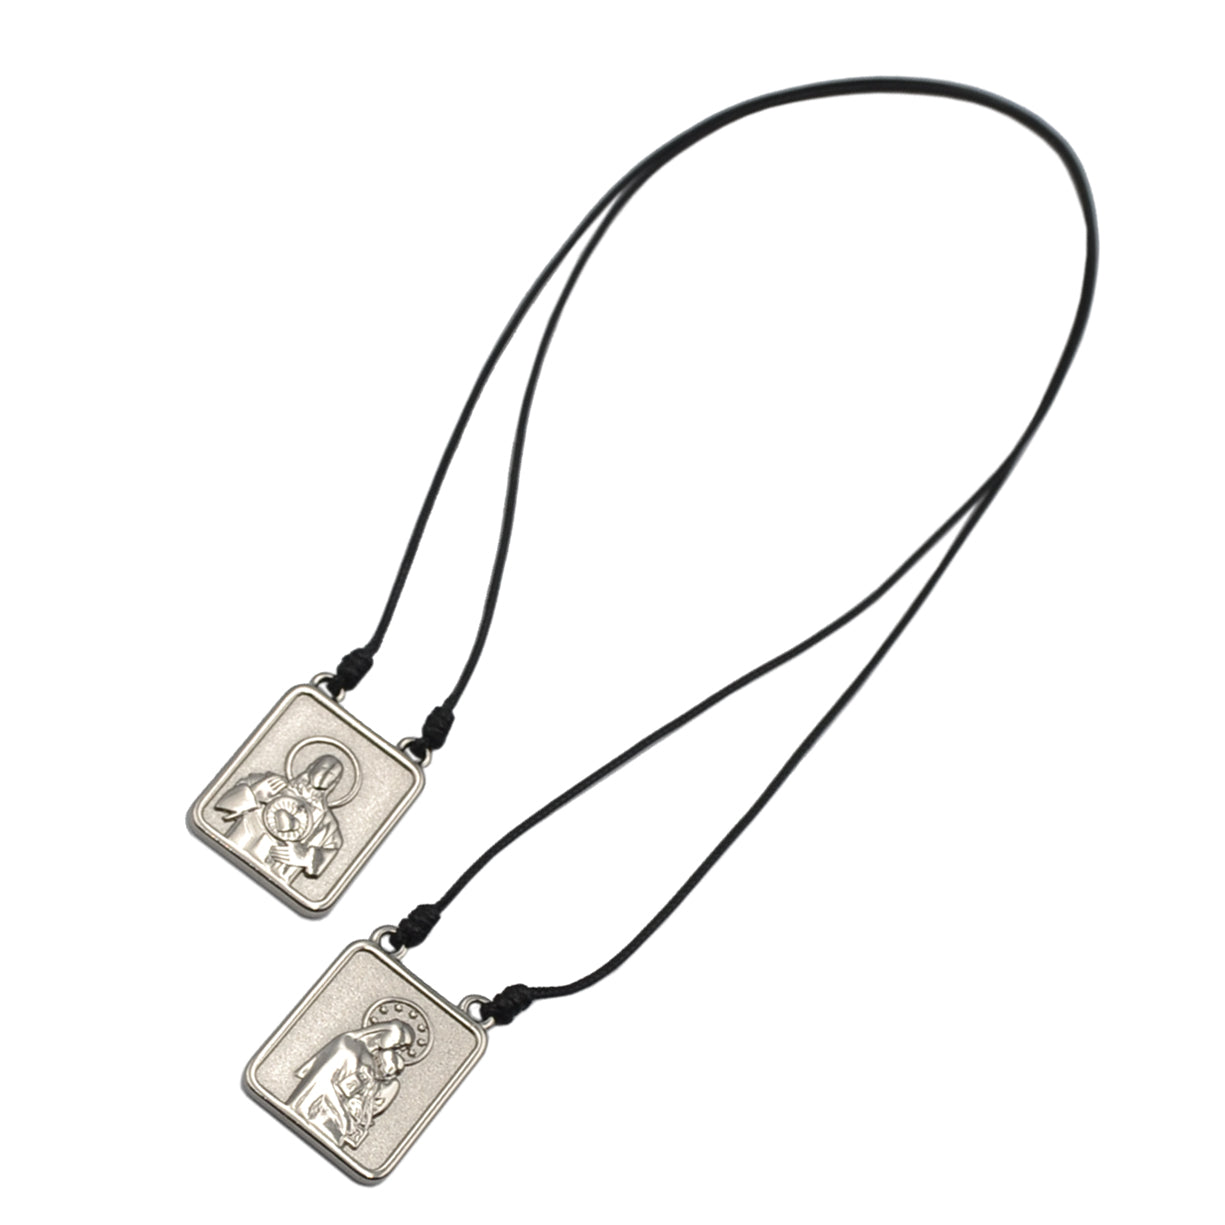 Male Scapular with Cord in Pendant Black or Silver - Men's Necklace - Male Jewelry